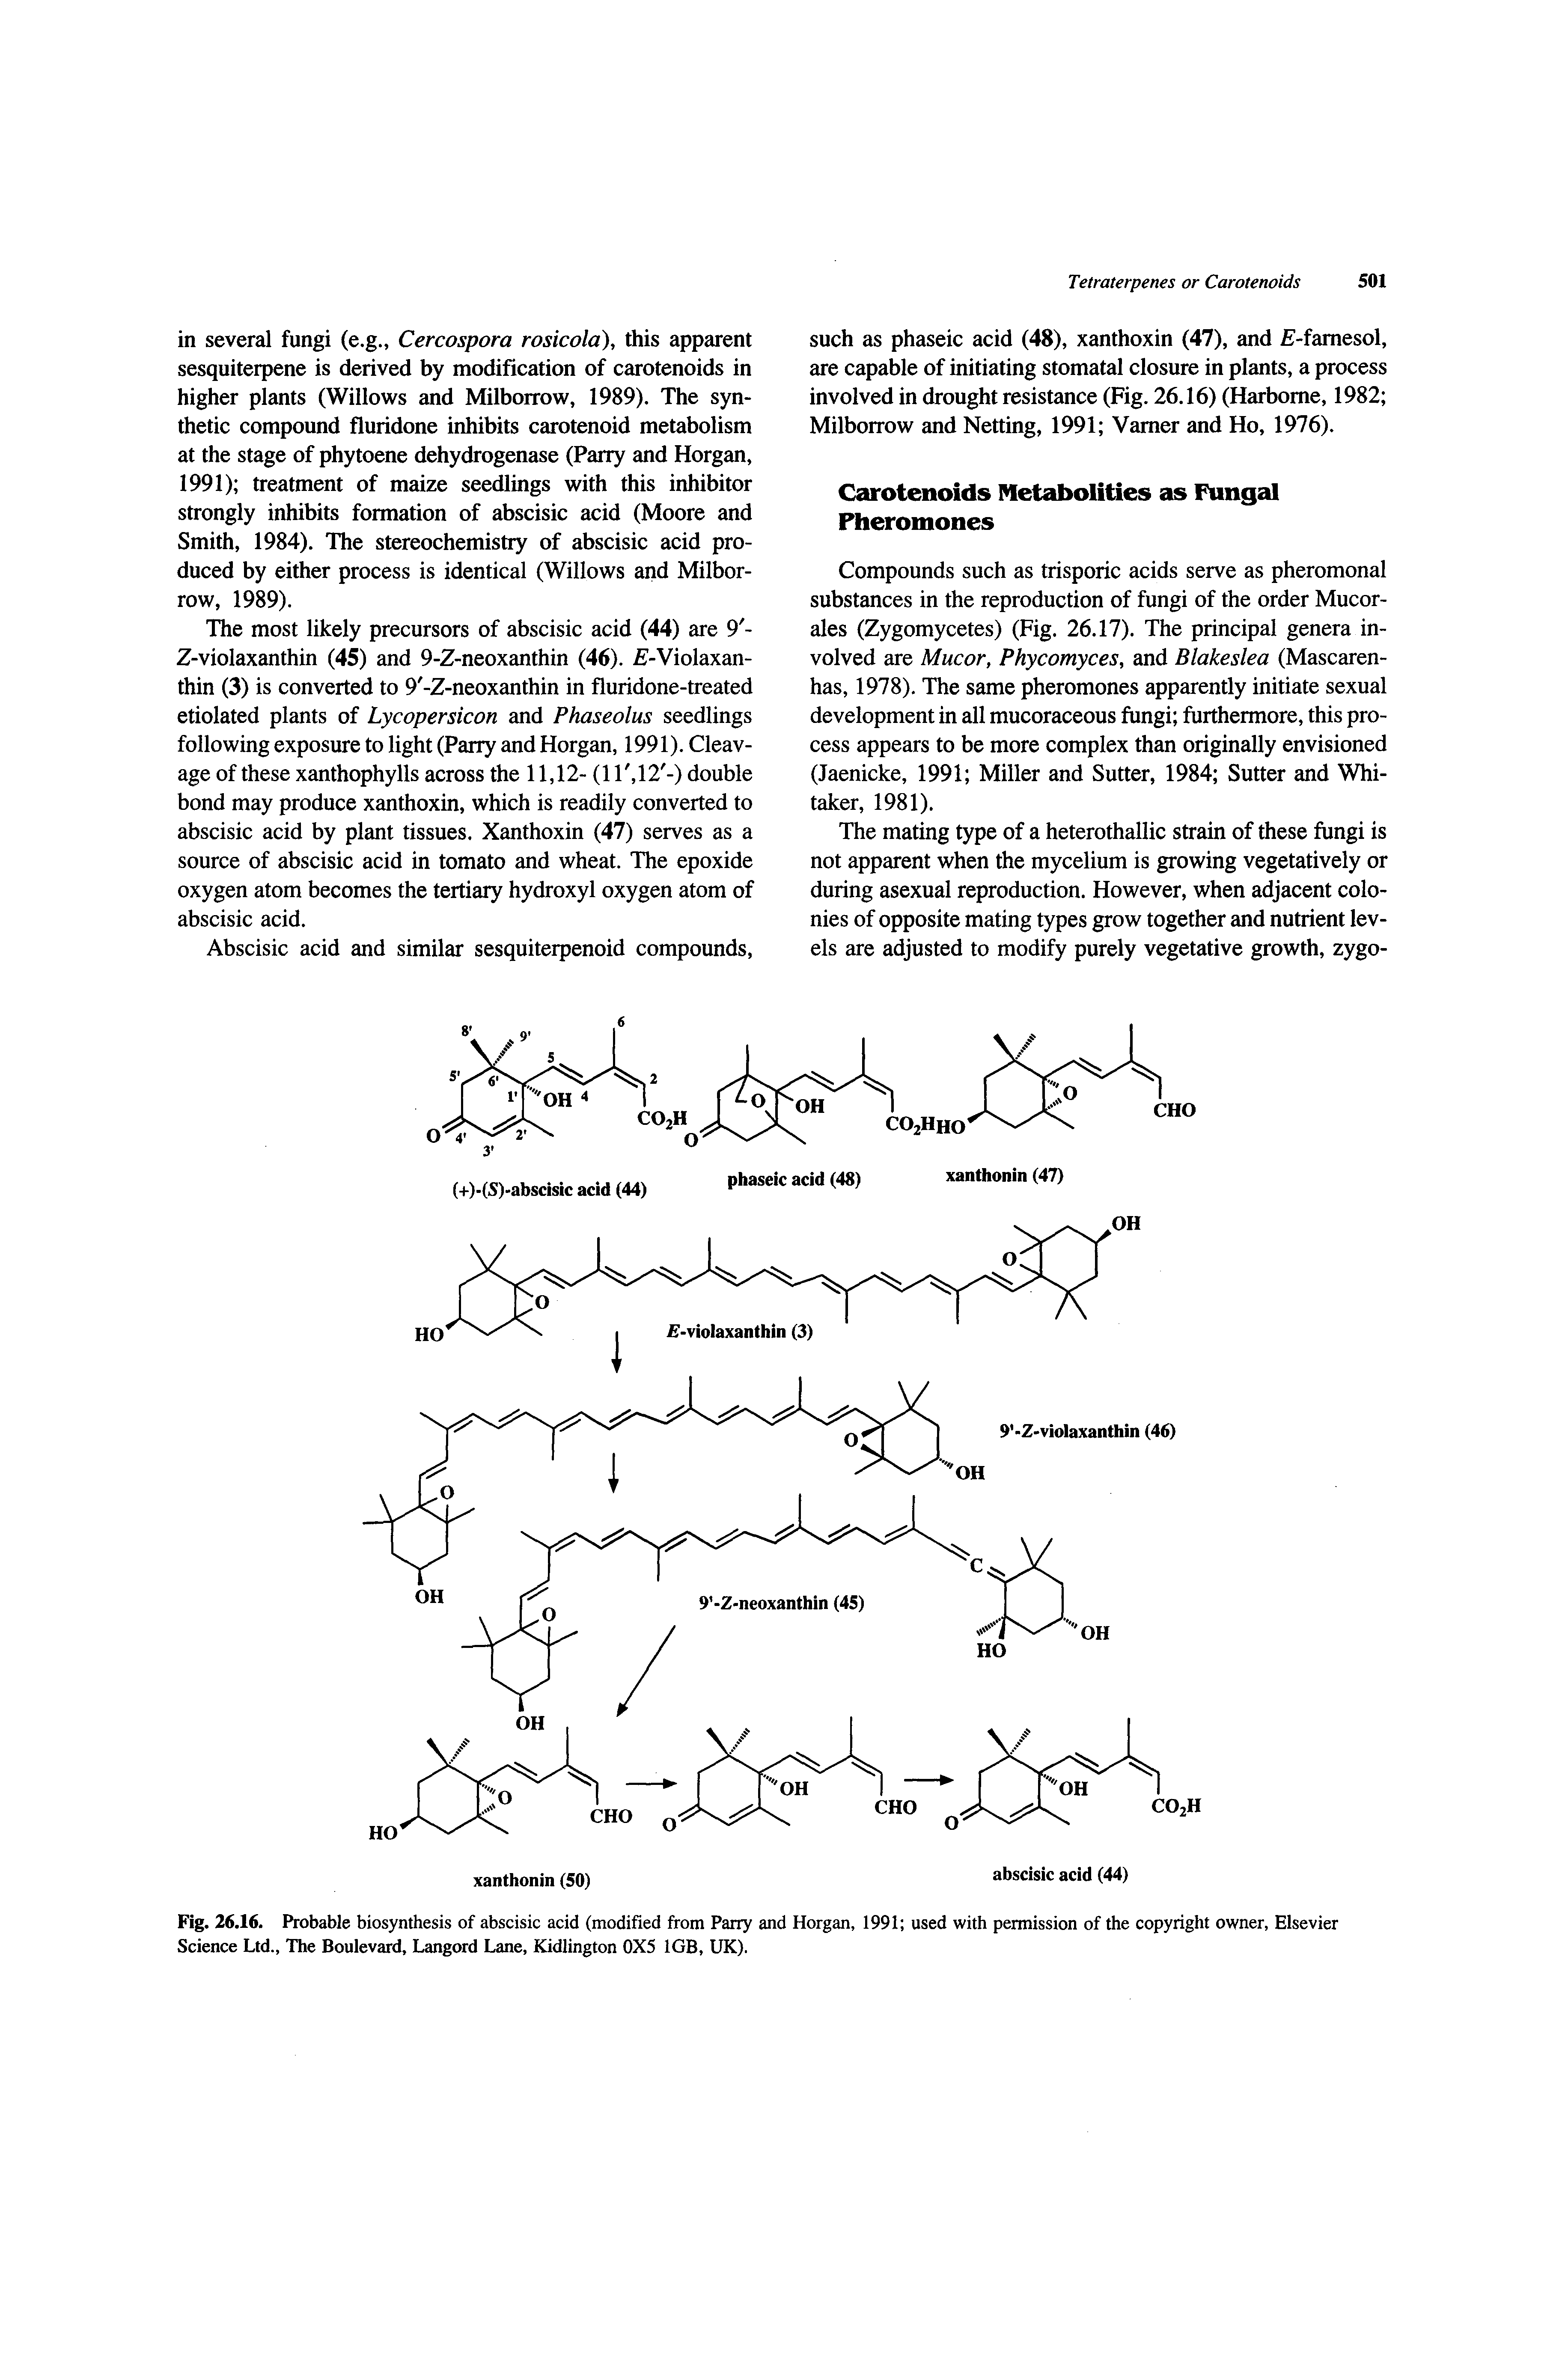 Fig. 26.16. Probable biosynthesis of abscisic acid (modified from Parry and Morgan, 1991 used with permission of the copyright owner, Elsevier Science Ltd., The Boulevard, Langord Lane, Kidlington 0X5 1GB, UK).